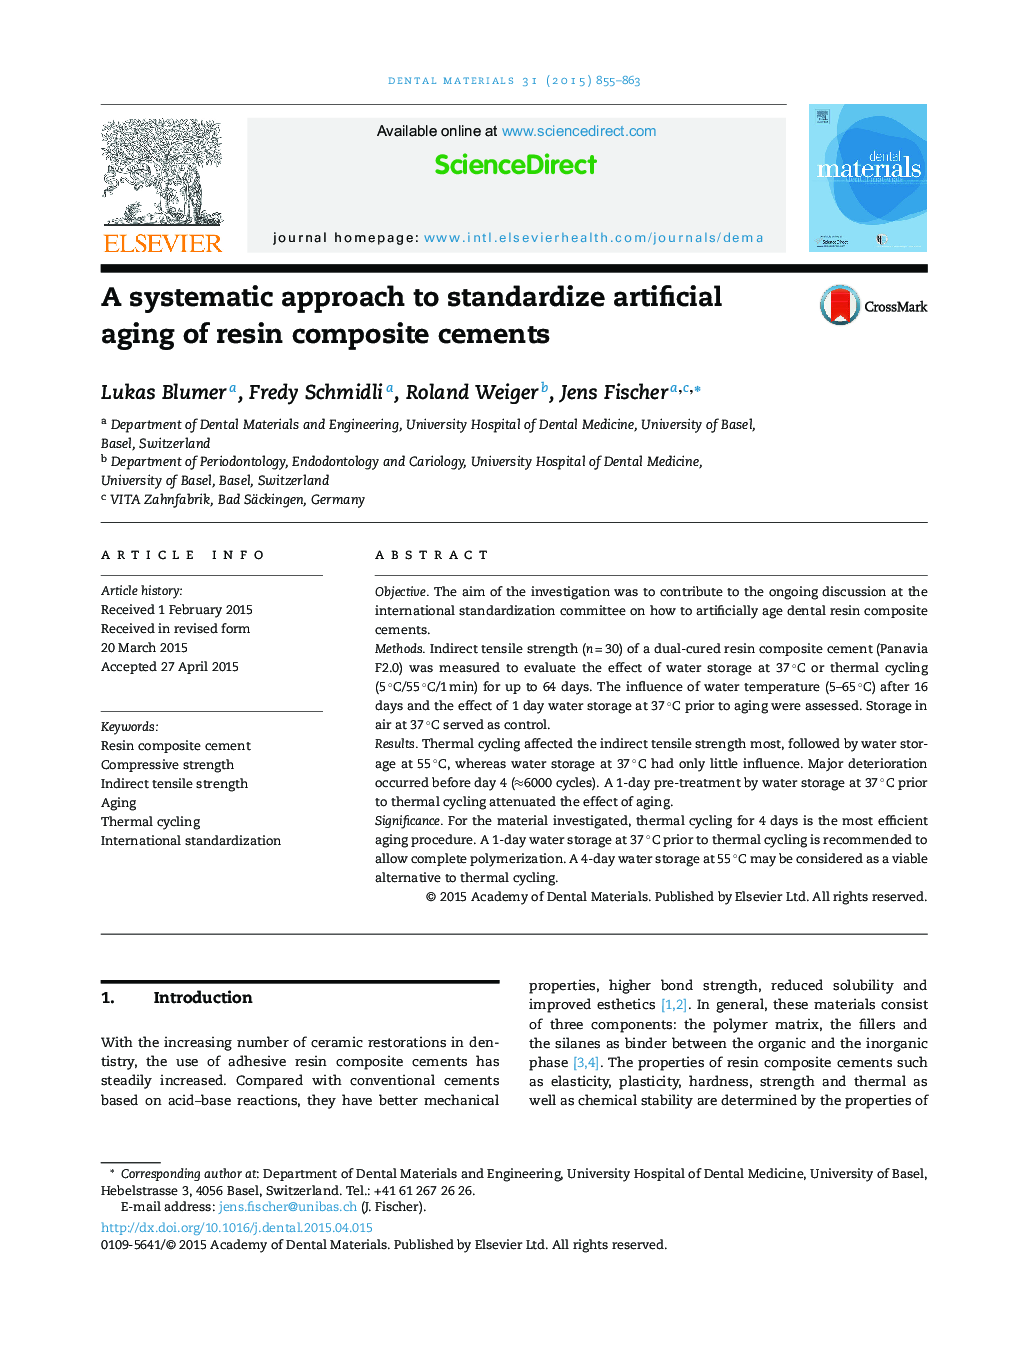 A systematic approach to standardize artificial aging of resin composite cements